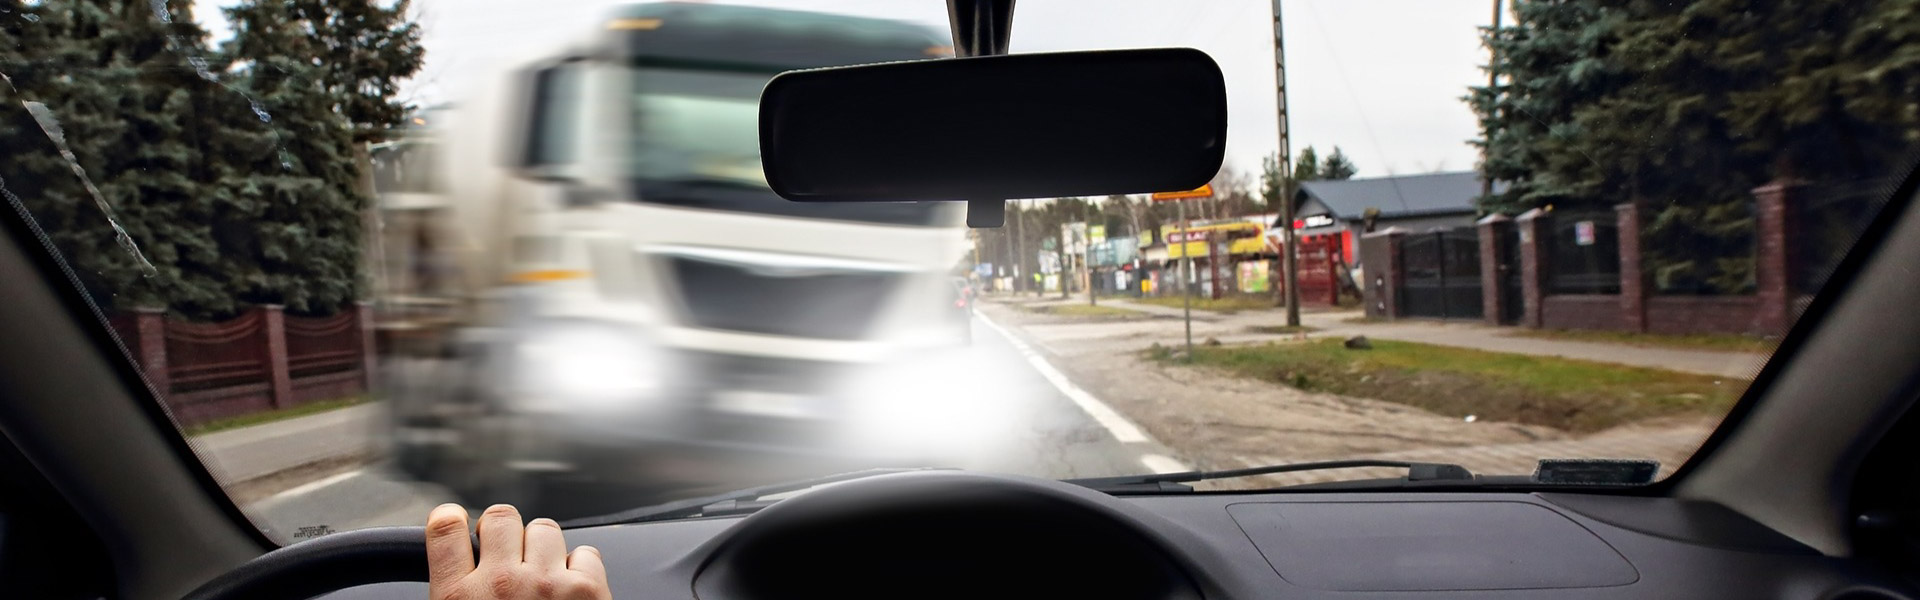 Is It Worth Having a Dashcam in Your HGV?